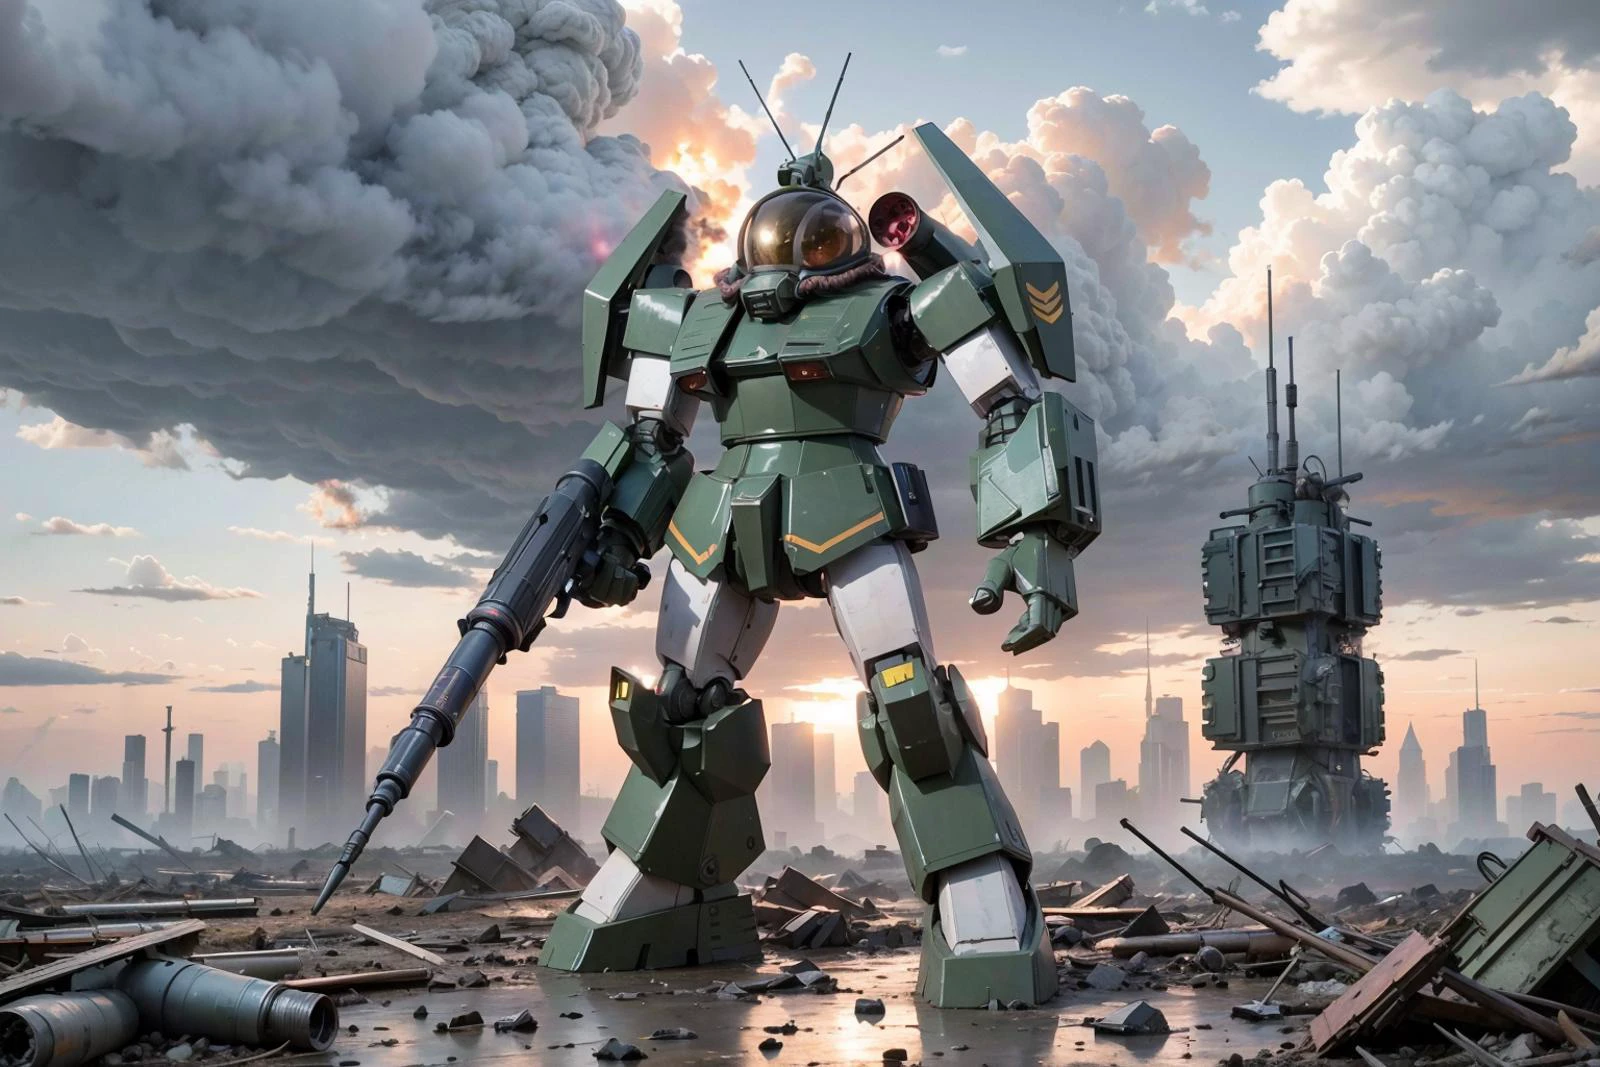 RAW photo of a giant urban camouflage colored robot with a gun in its hand, firing rockets from it's shoulder mounted rocket launcher, standing in a desolate, destroyed post-apocalyptic city, cloudy sky, harsh landscape, cluttered with debris
 